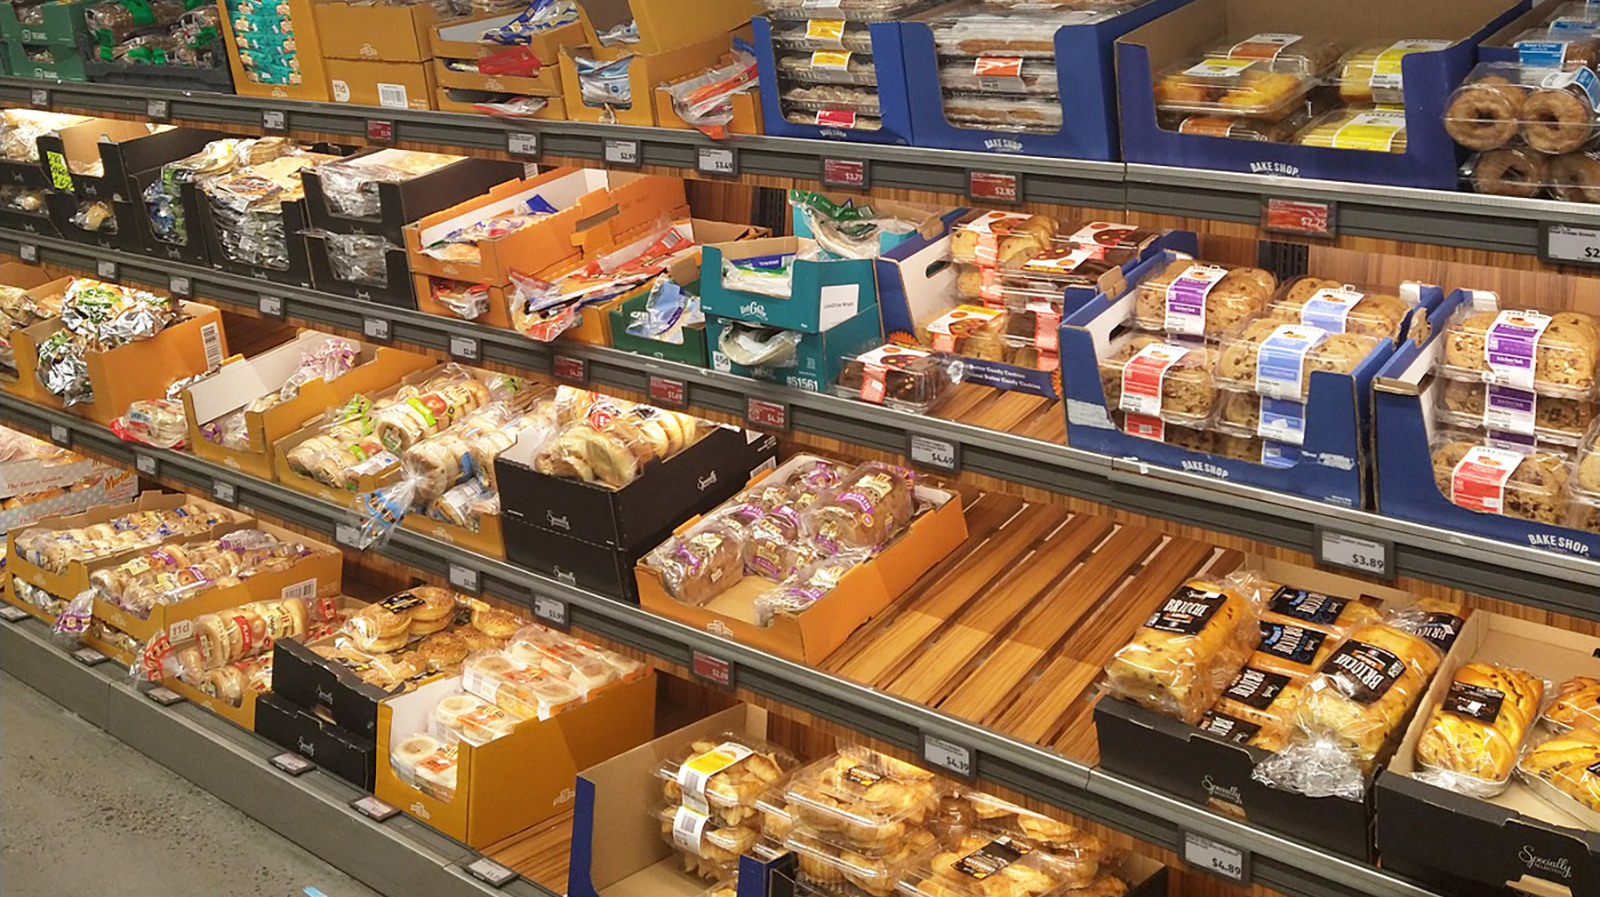 21 Aldi Bakery Items Ranked Worst To Best